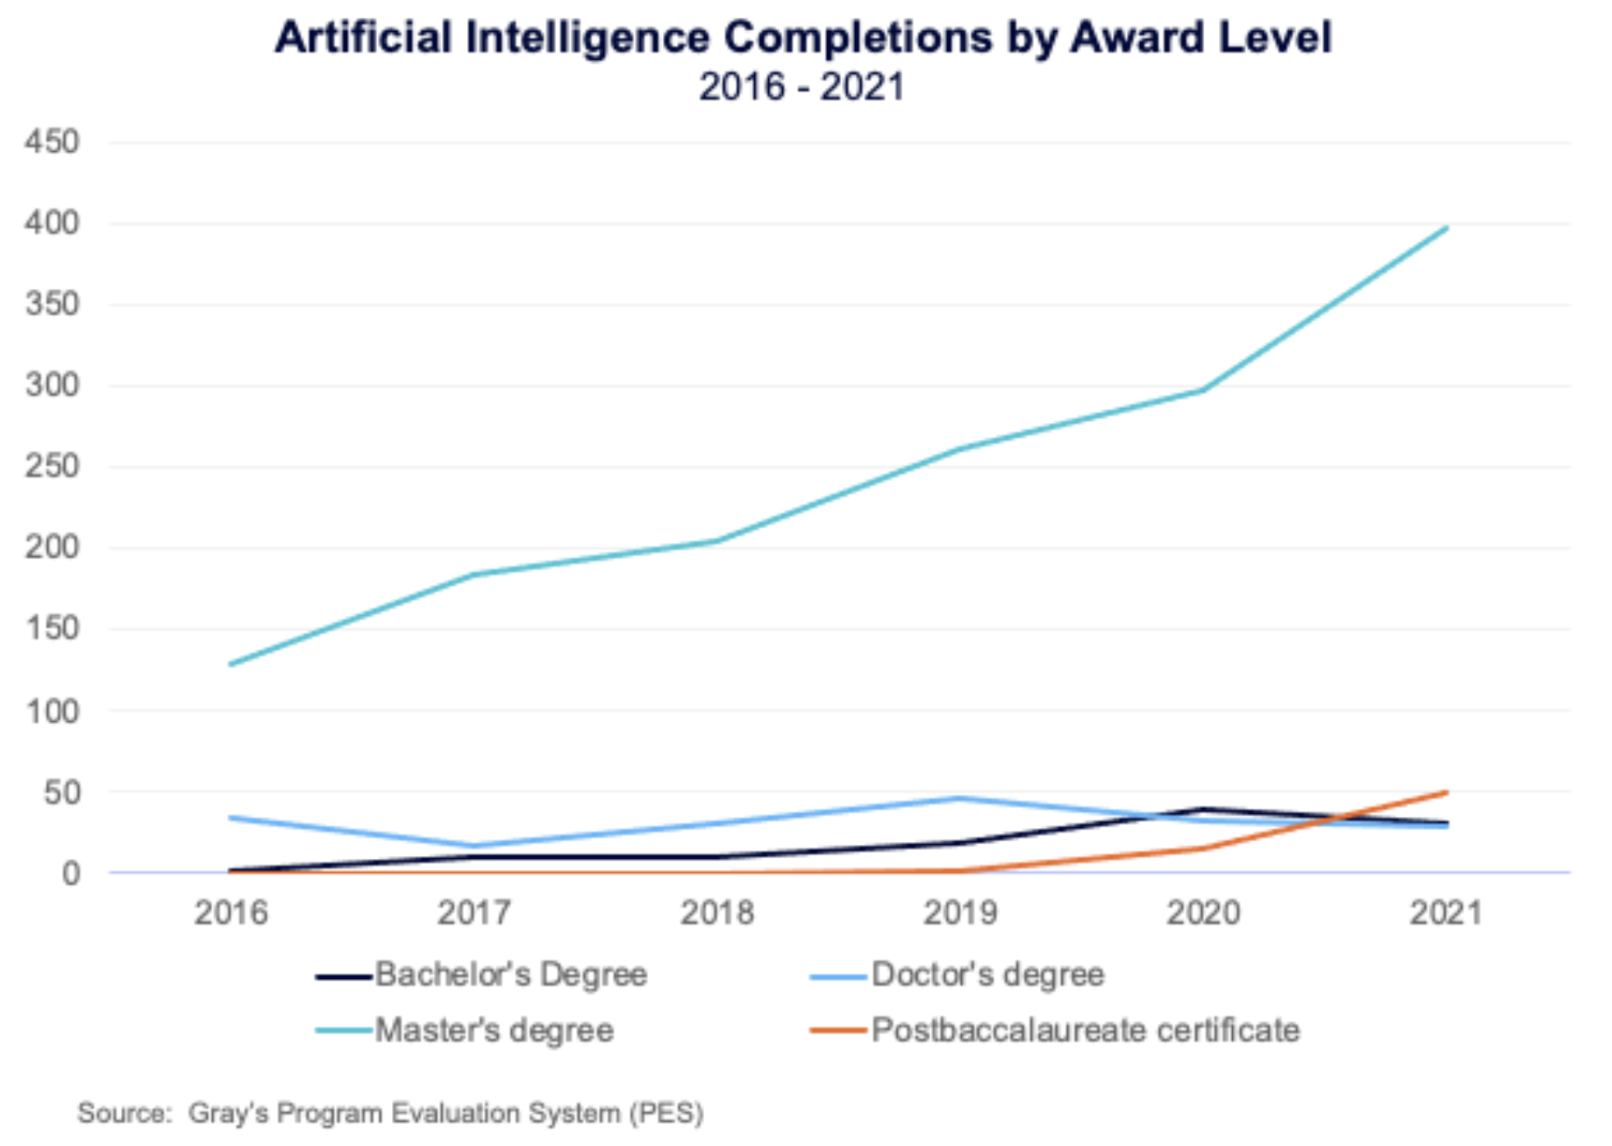 Artificial Intelligence Completions by Award Level